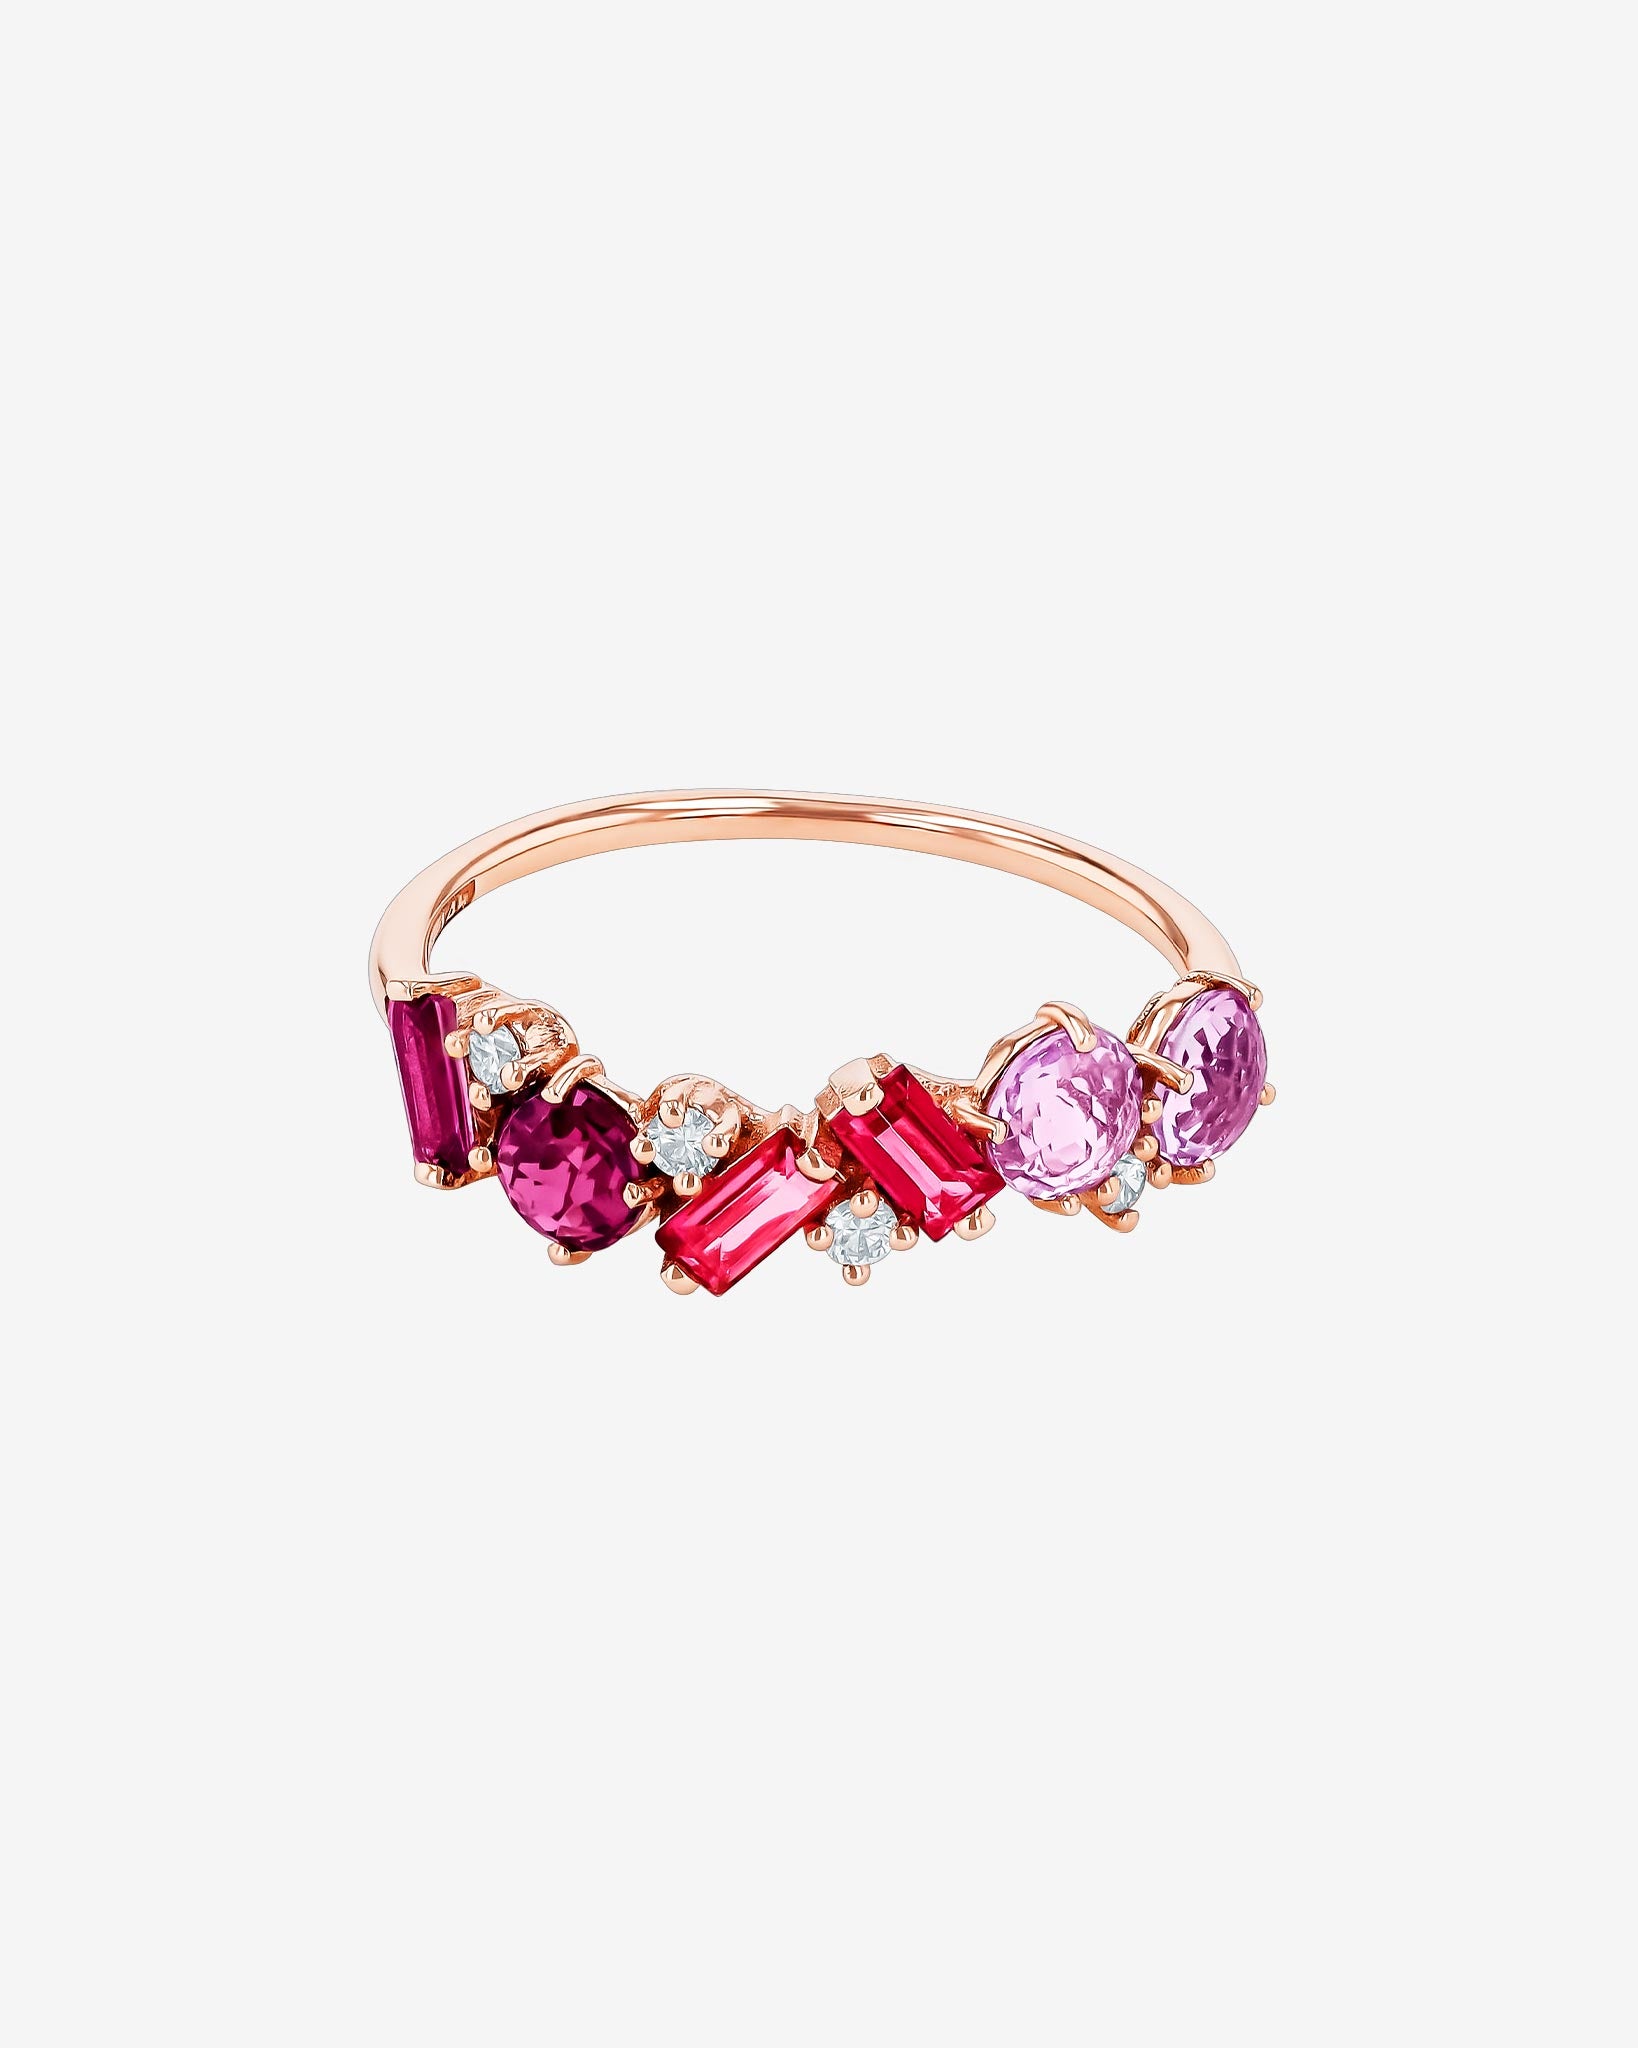 Kalan By Suzanne Kalan Amalfi Blend Red Ombre Half Band in 14k rose gold